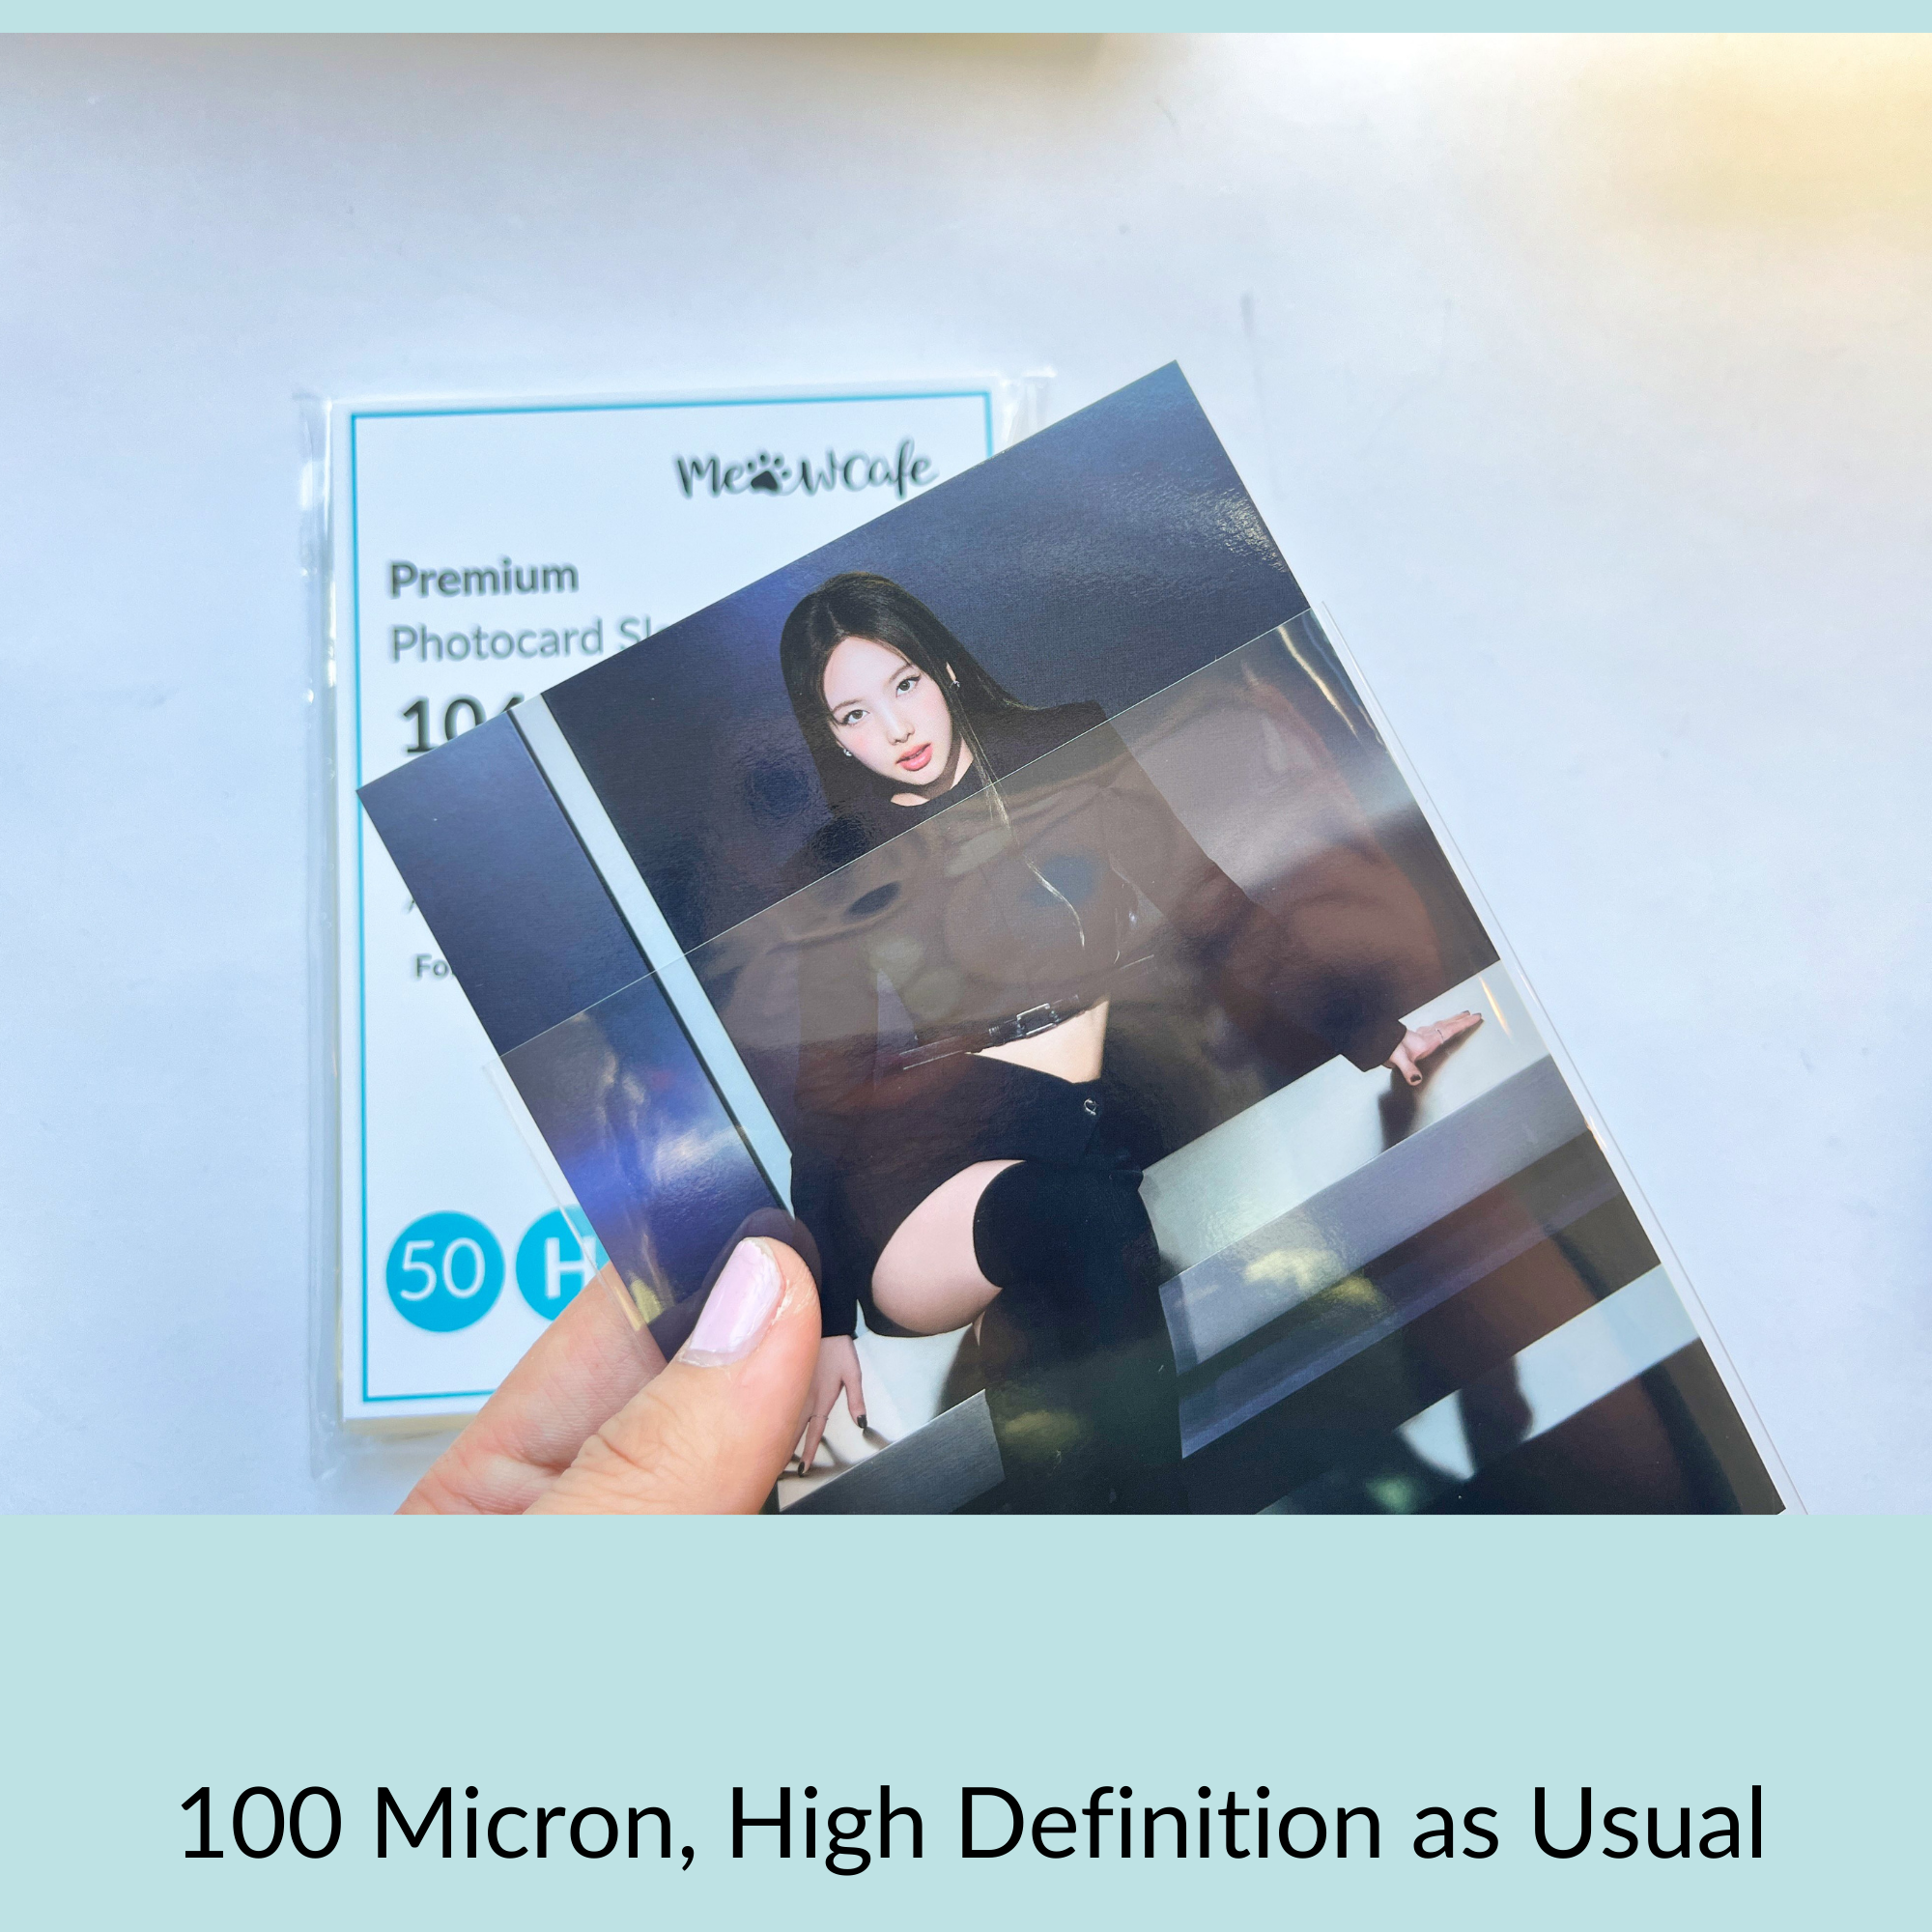 [104x153MM] Re-designed Meowcafe Premium CPP Card Sleeve for Kpop Photocards For 100x148MM (4x6 inch)Postcard